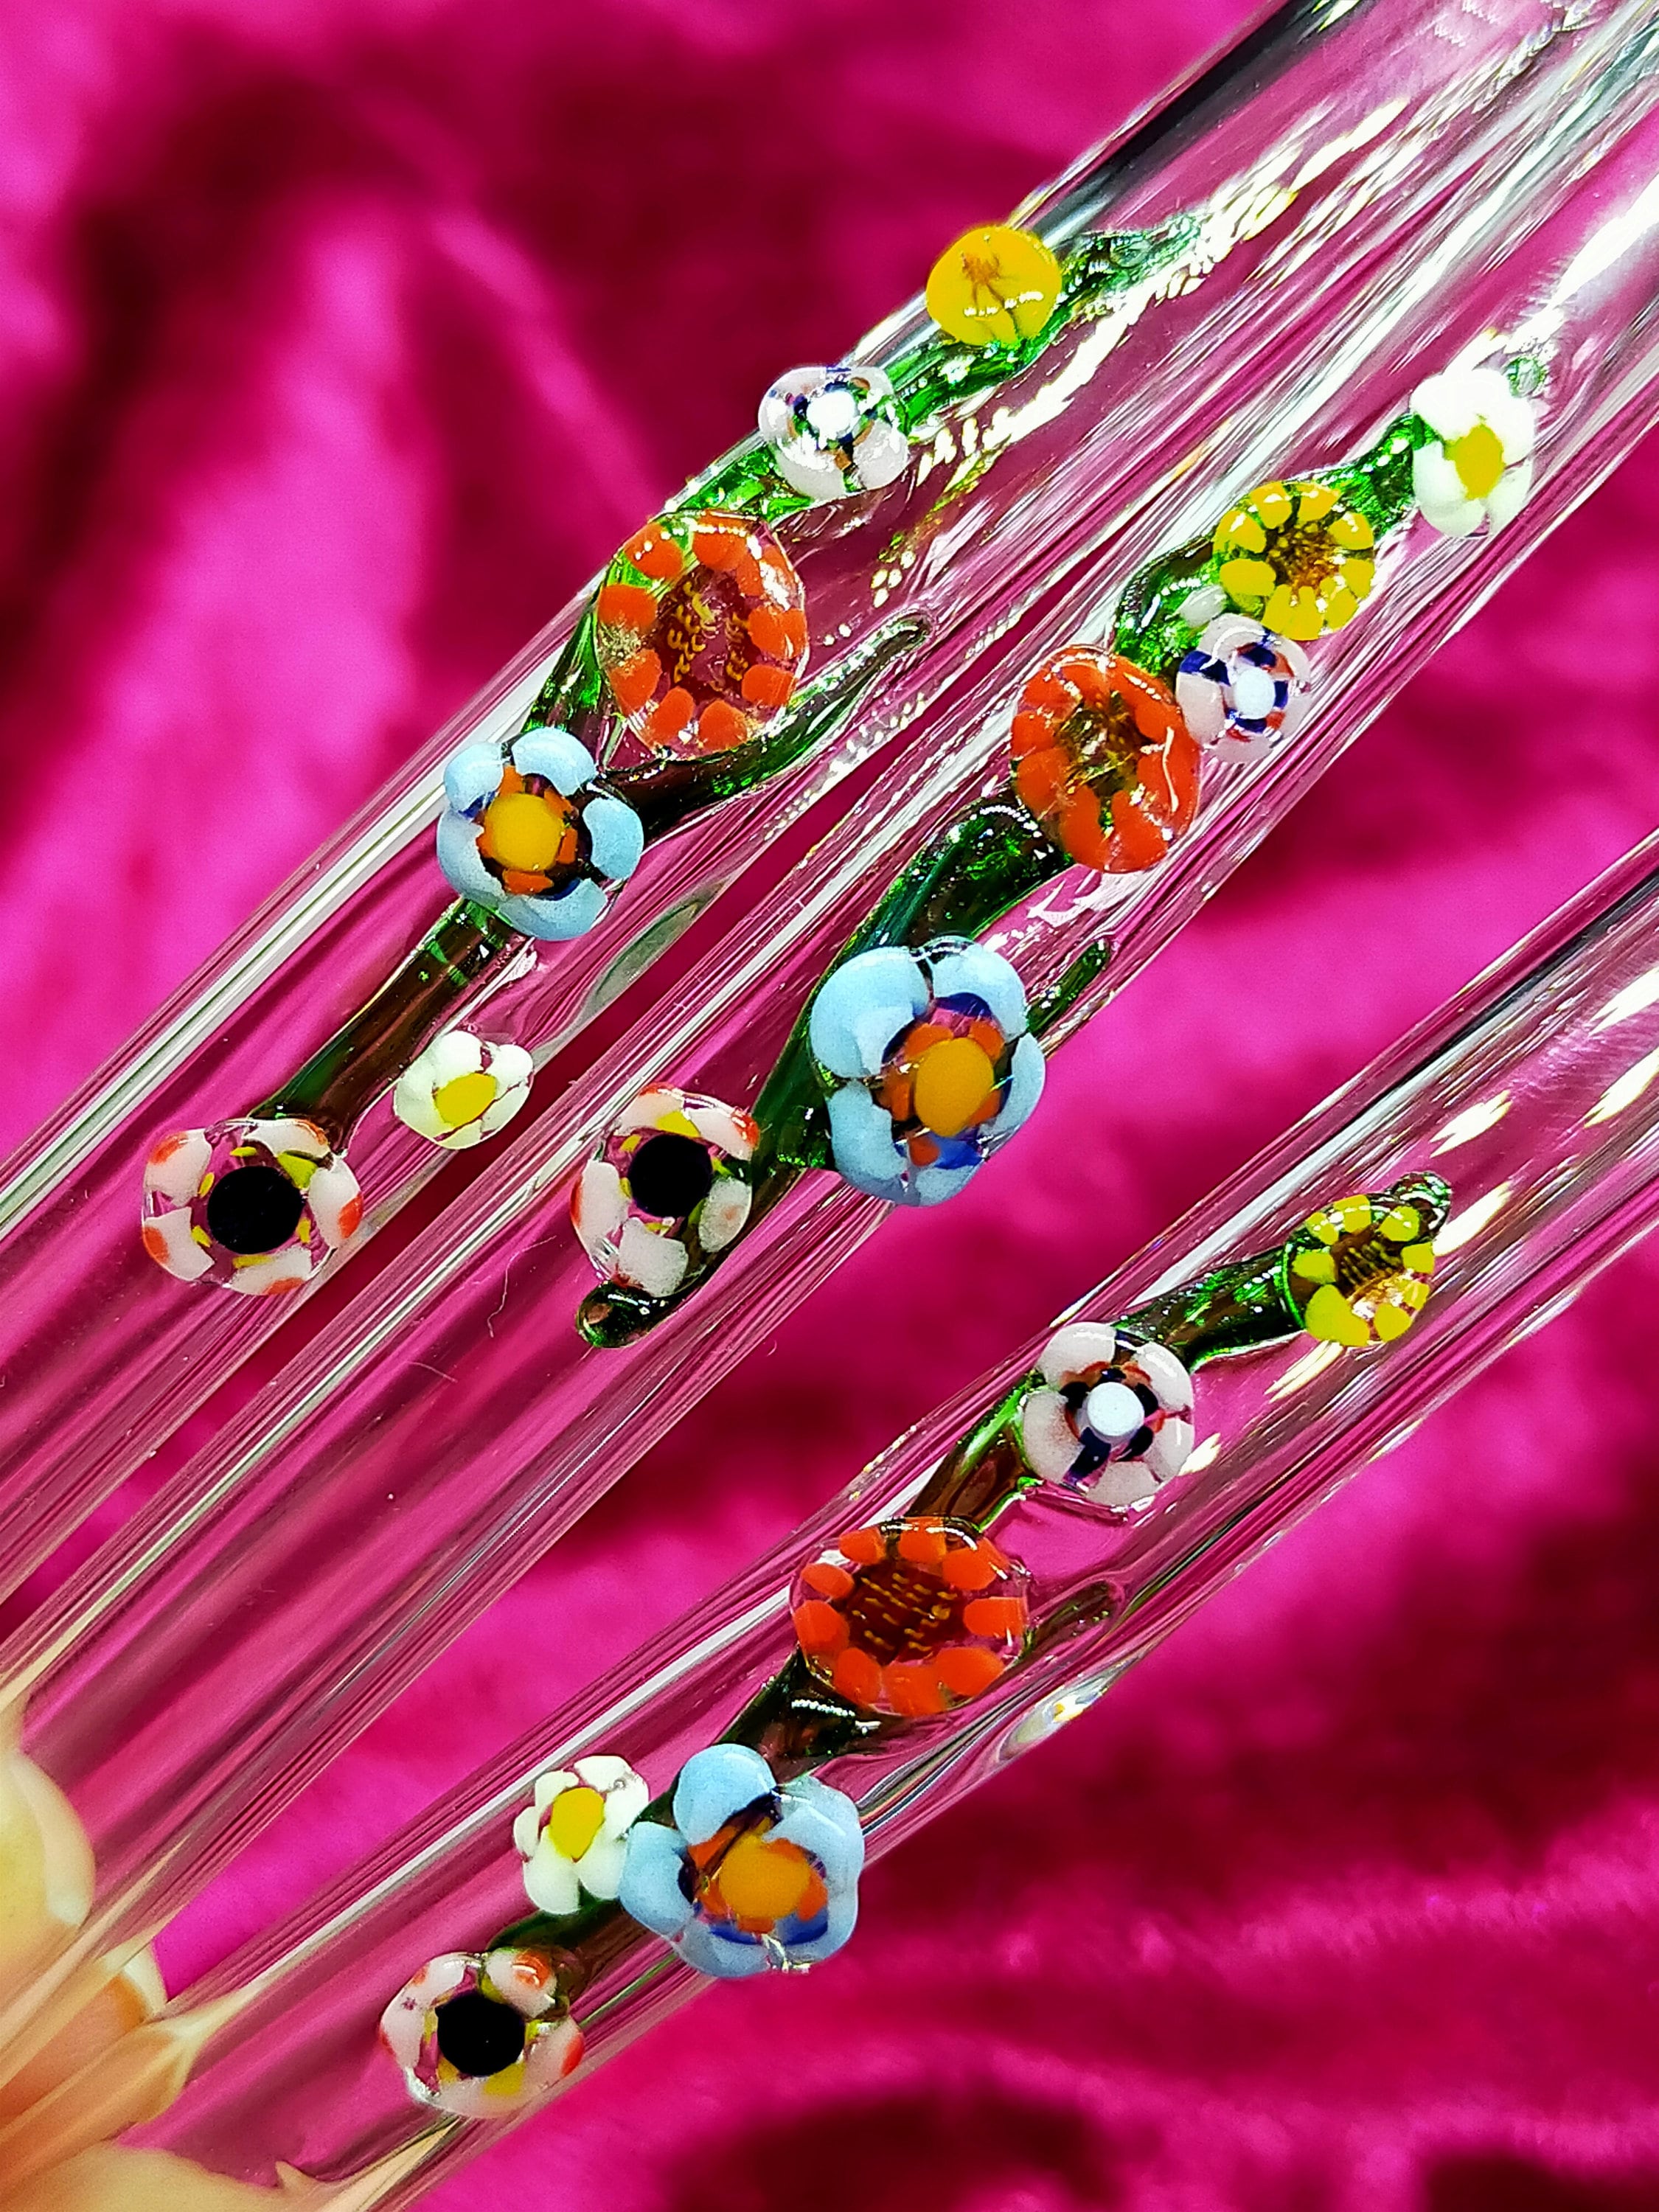 Price is for one straw they come with a cleaner and gift boxed Pyrex glass drinking straws millefiori design